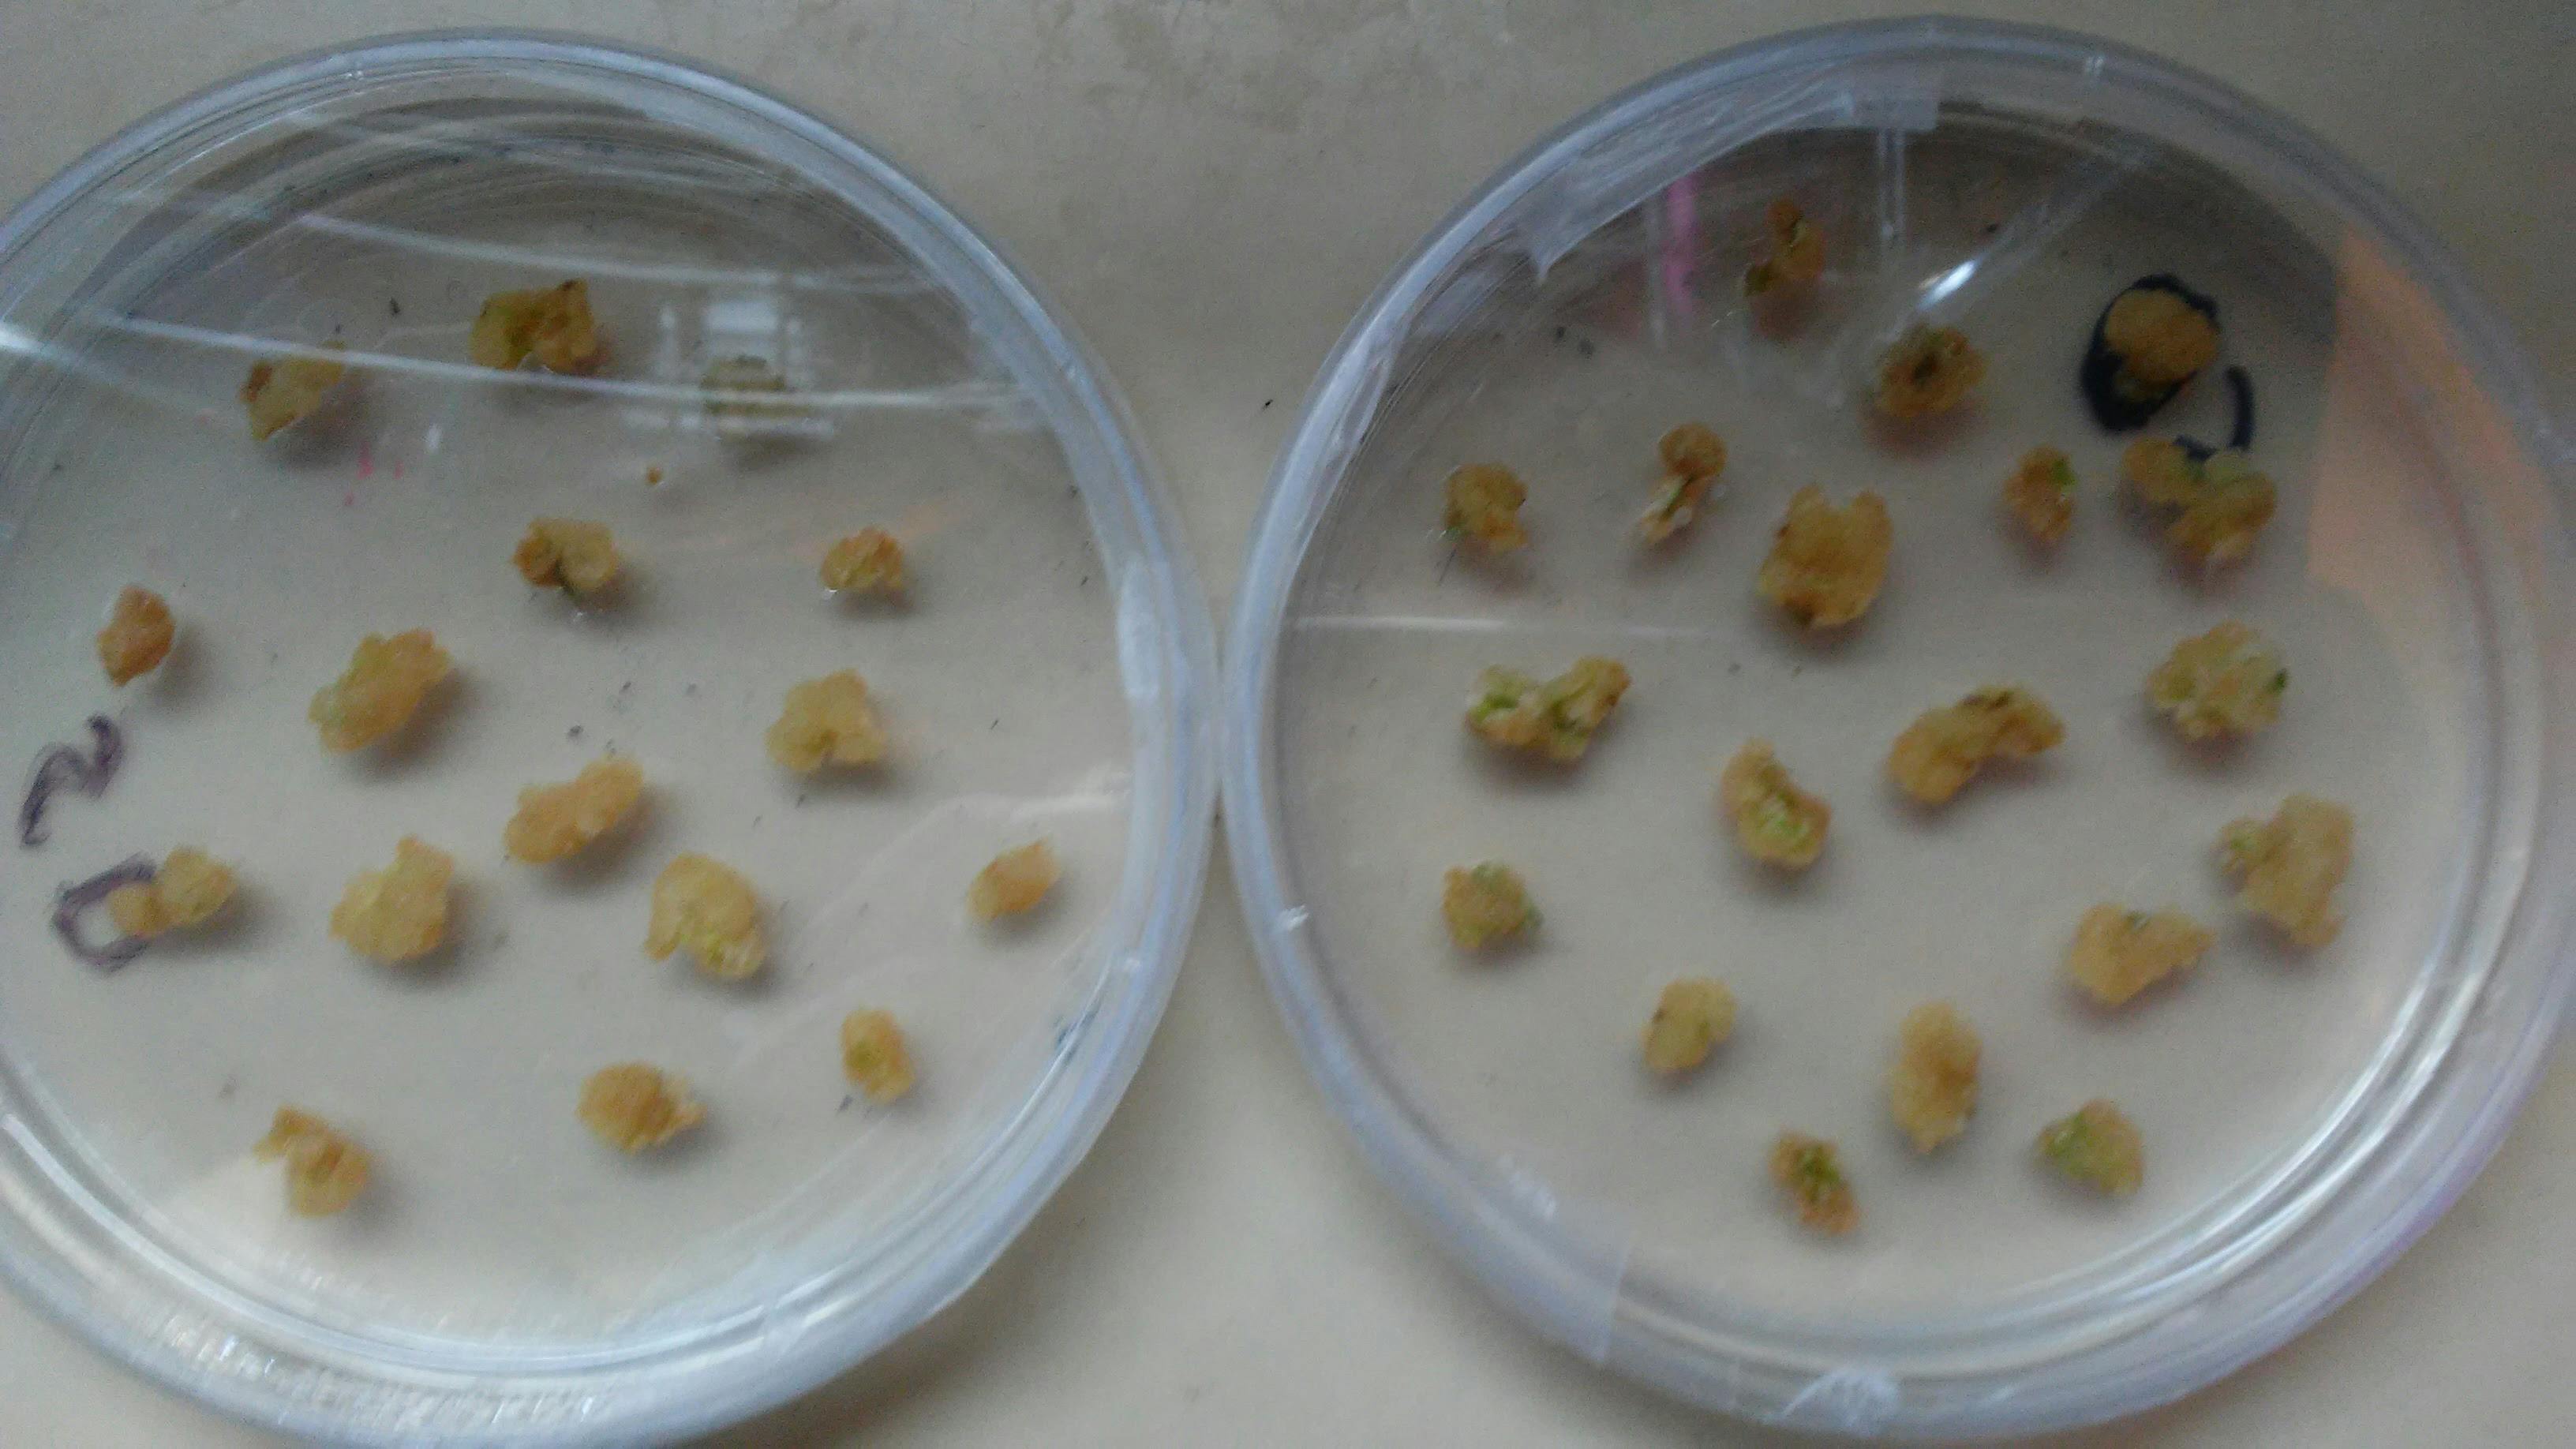 Cannabis callus (stem cell) induction in tissue culture.